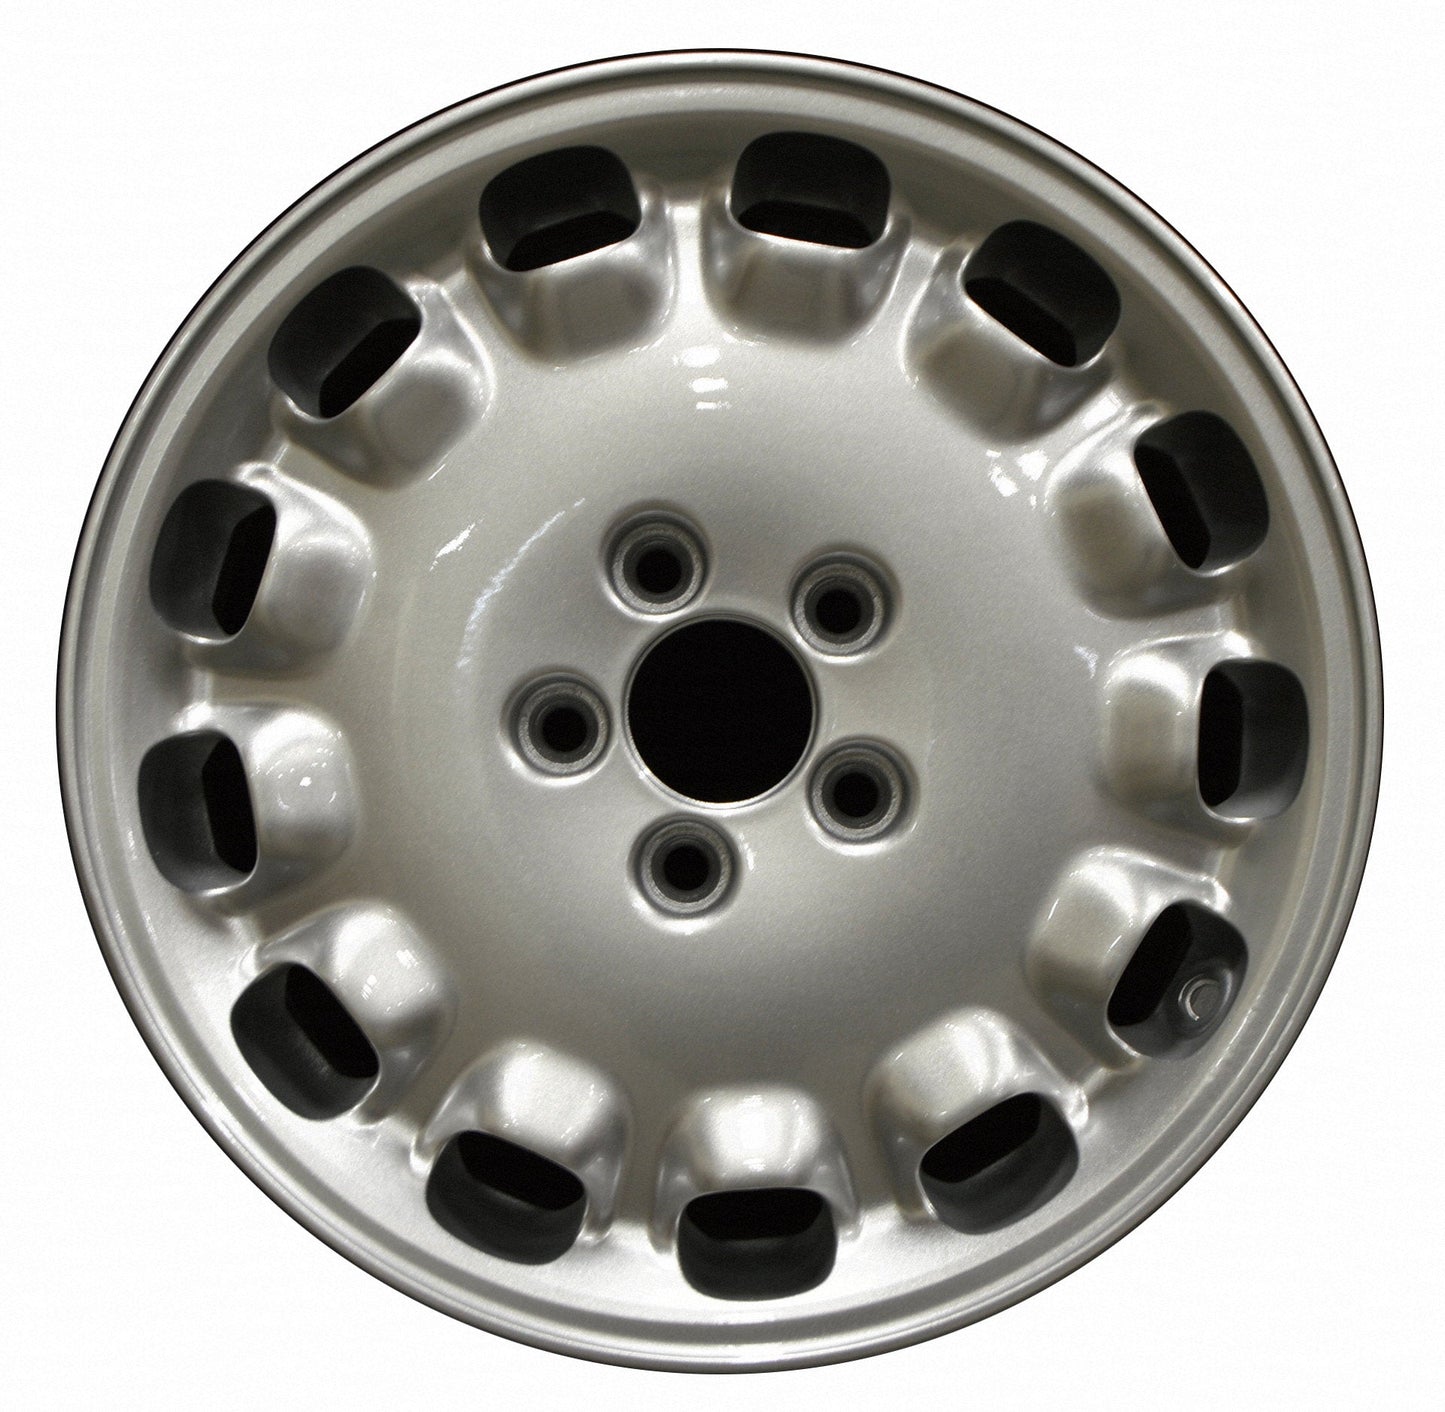 Volvo 80 Series  1999, 2000, 2001, 2002, 2003 Factory OEM Car Wheel Size 16x7 Alloy WAO.70211.PS08.FF